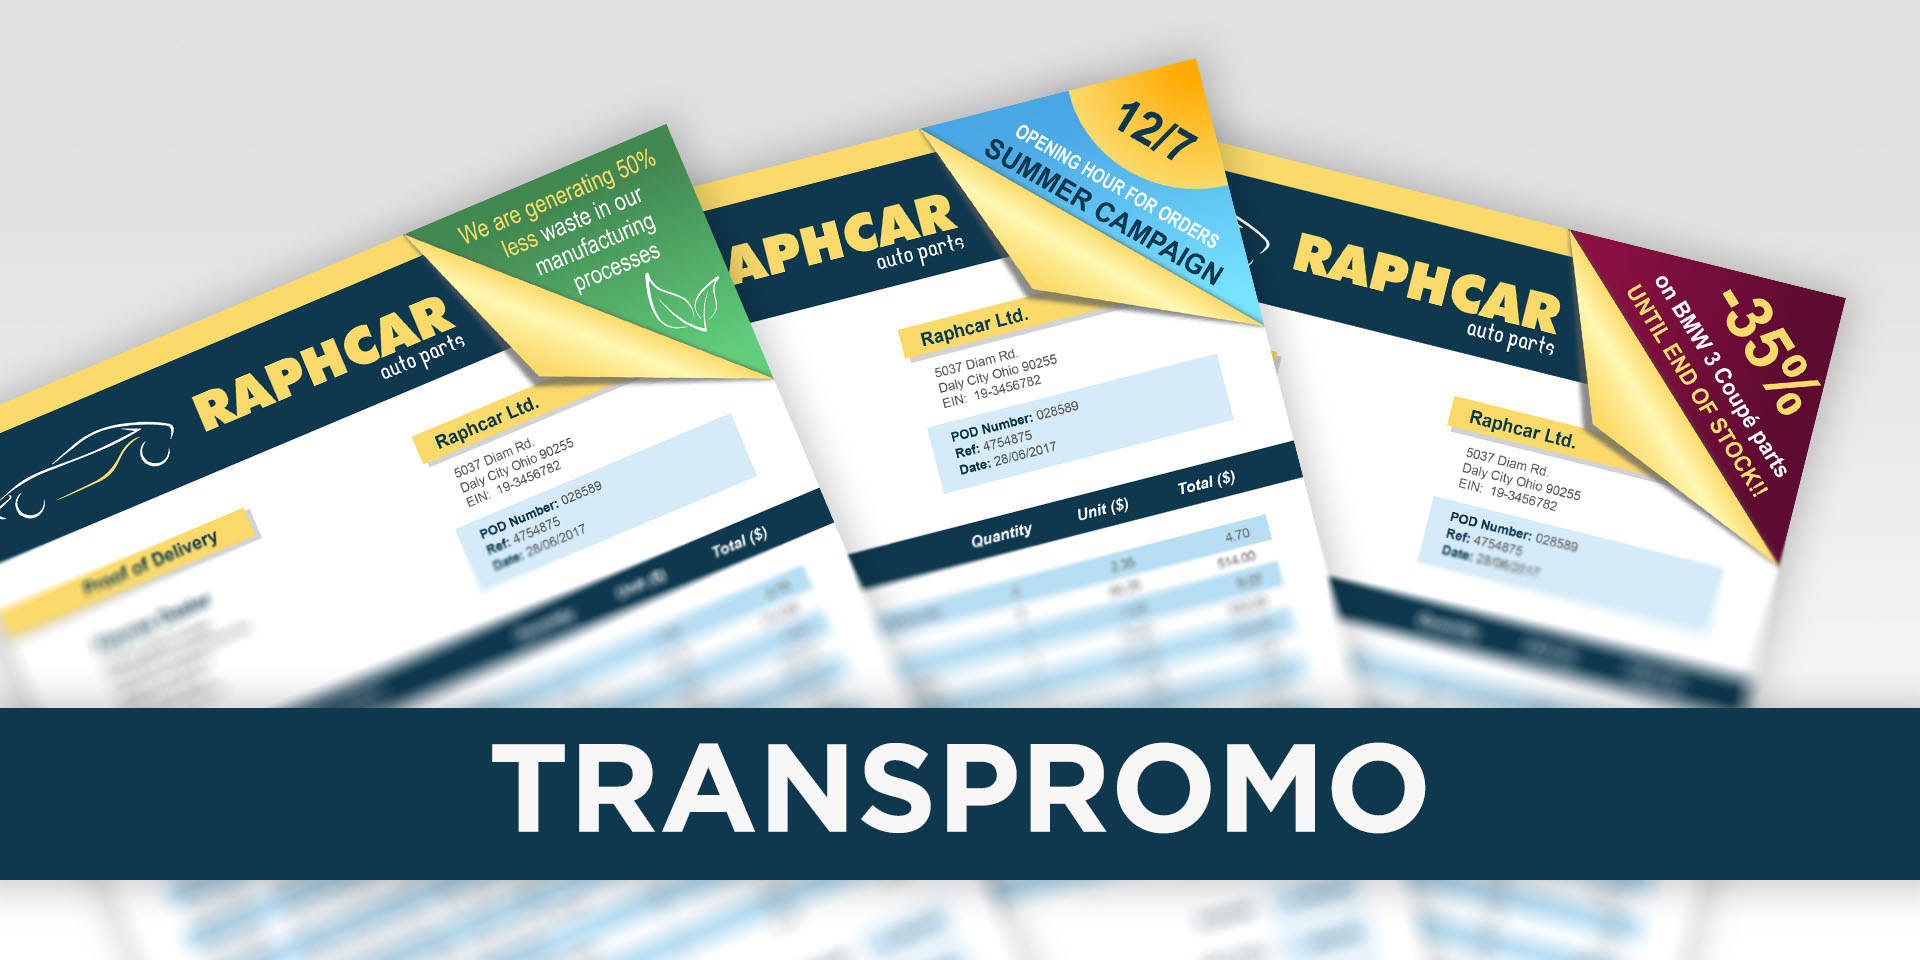 TransPromo is defined as the inclusion of any kind of personalized marketing content within transactional documents